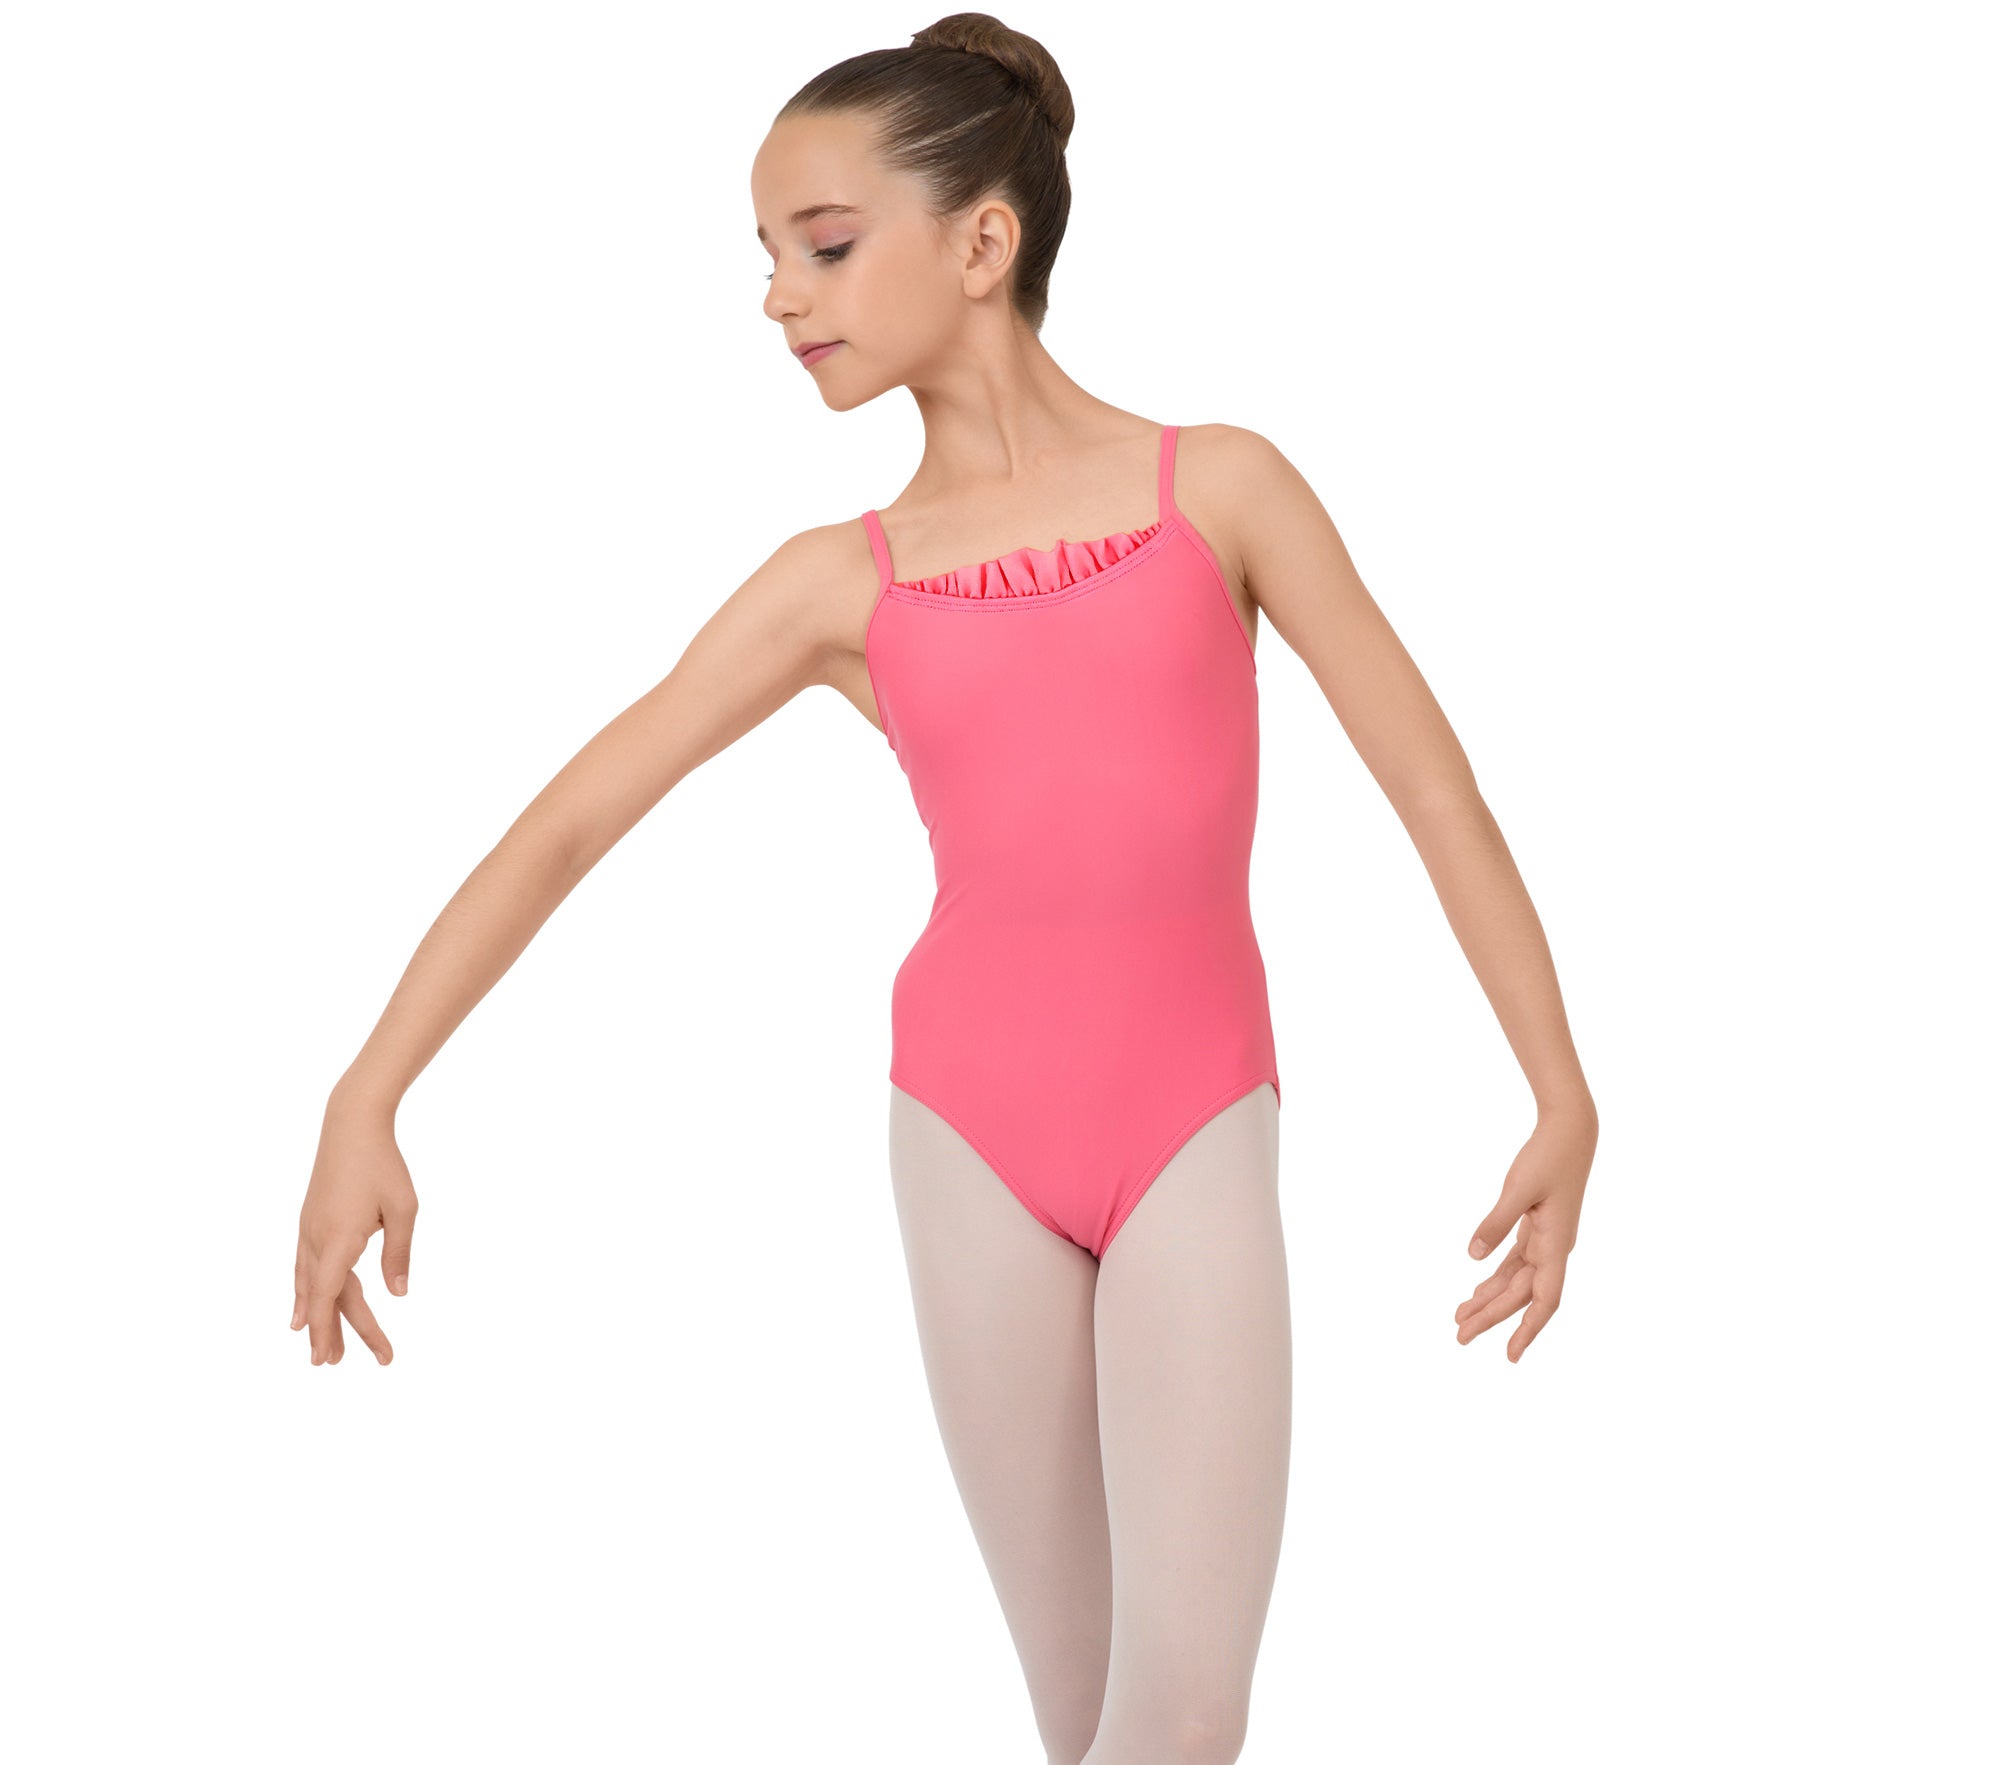 Red or pink body dance suit leotard for girls - Repetto⎜Ezabel Ballet